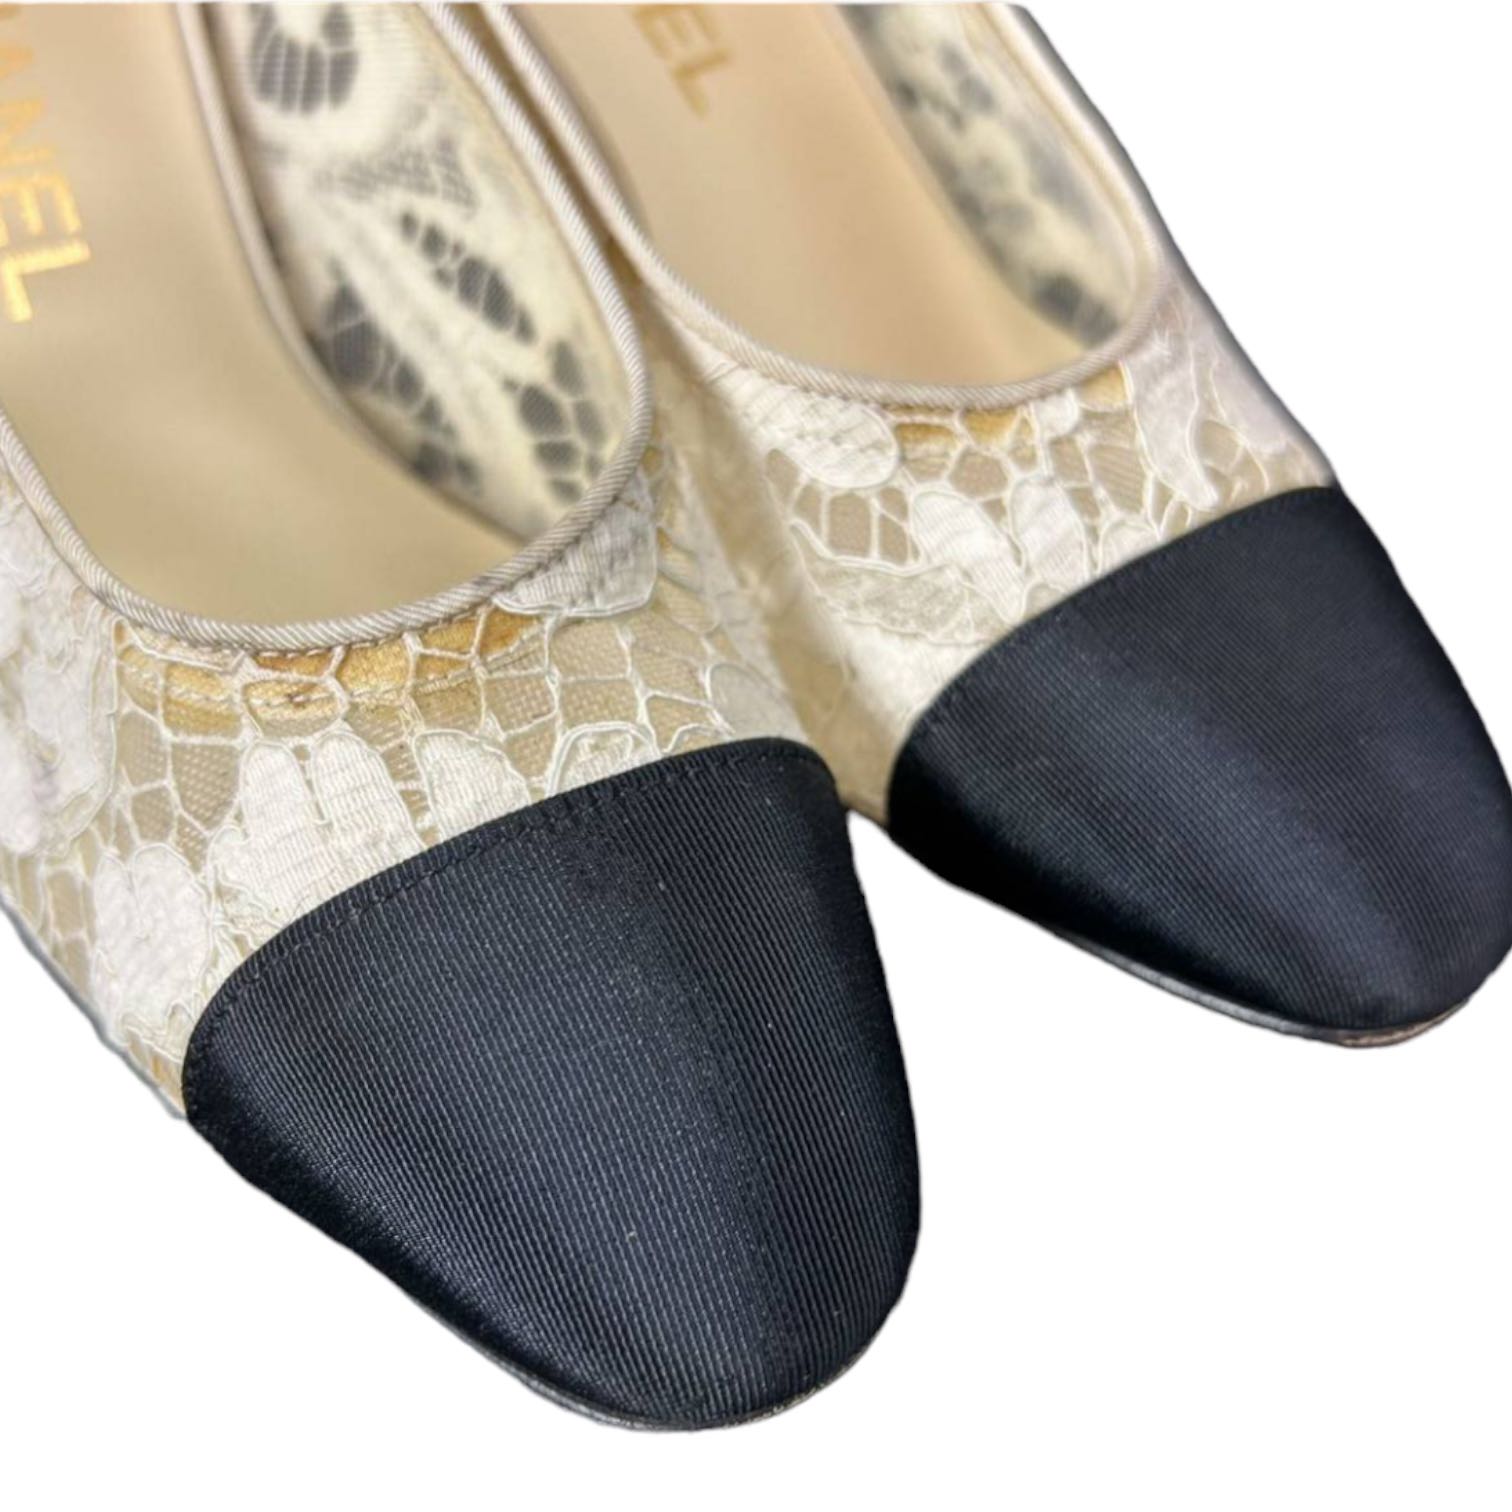 Chanel Sheer Lace with Contrast Toe Caps and Grosgrain Details Pumps - 4